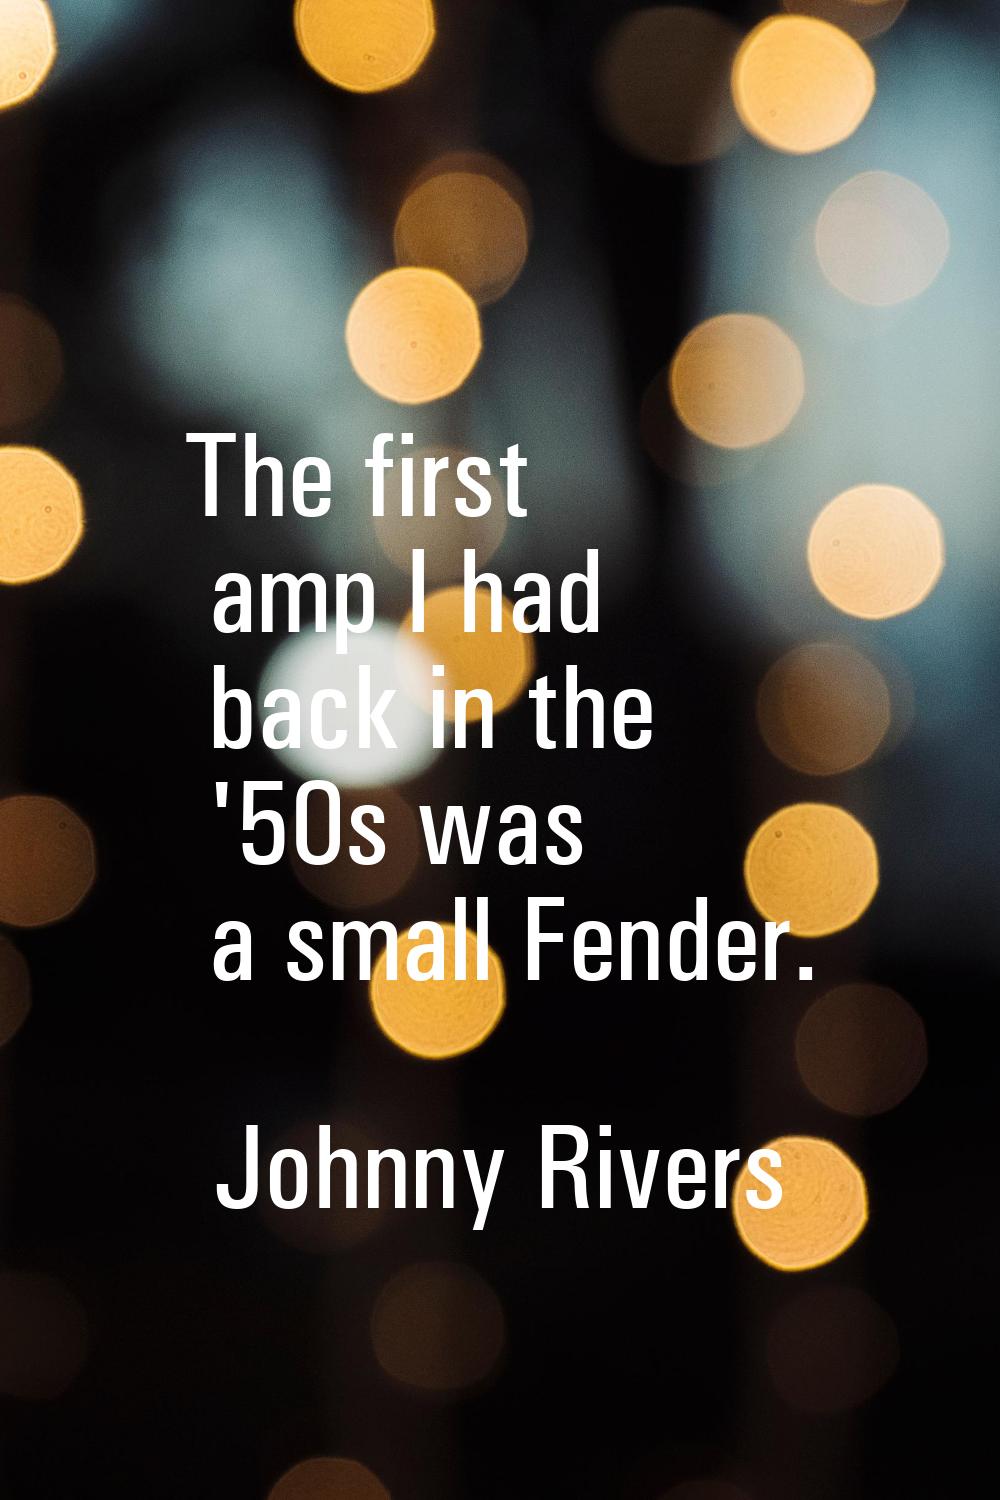 The first amp I had back in the '50s was a small Fender.